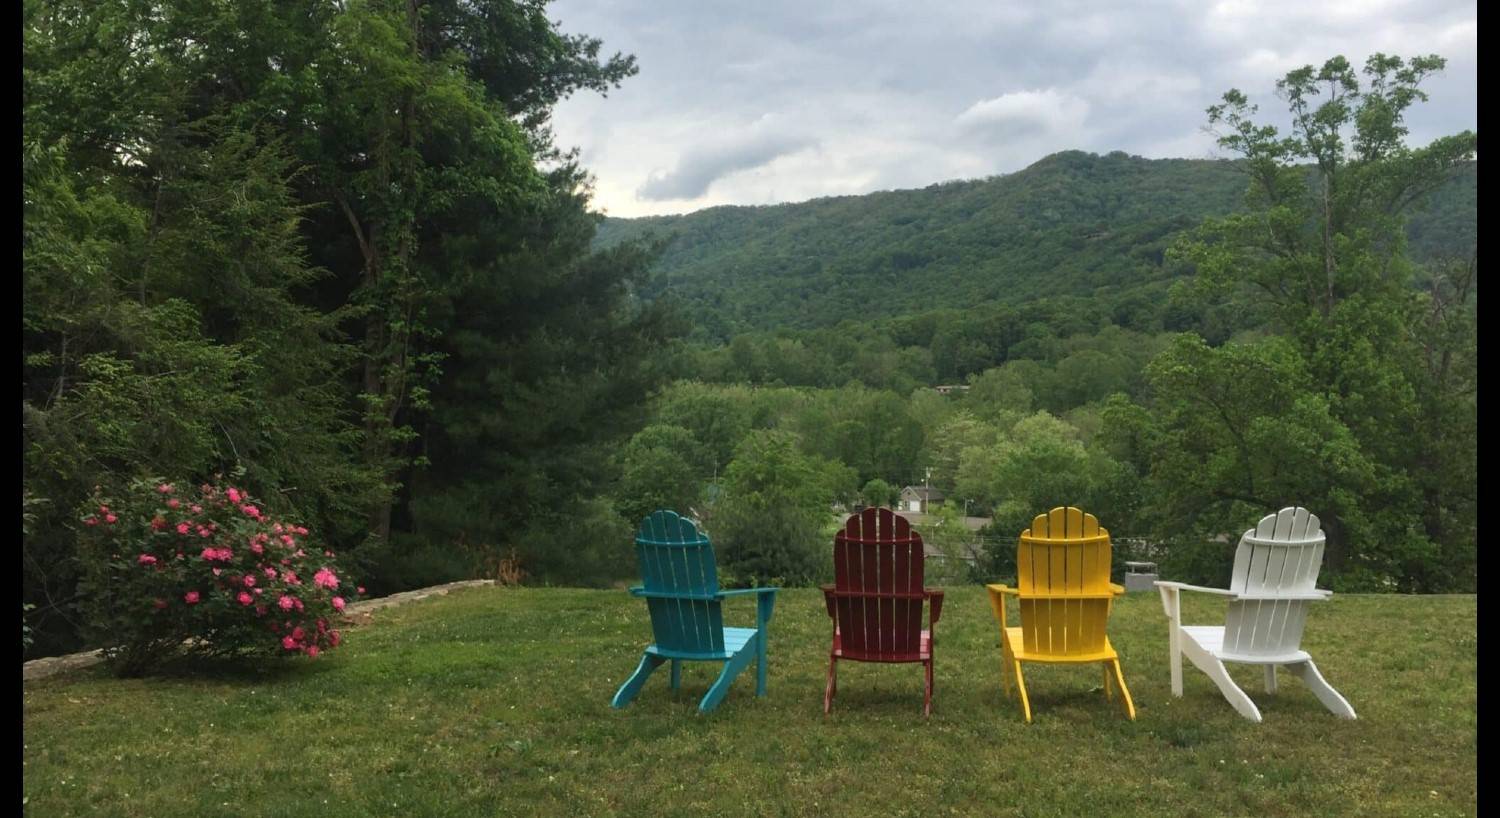 Adirondack Chairs Overlooking Eagle's Nest Mountain at the Andon-Reid Inn